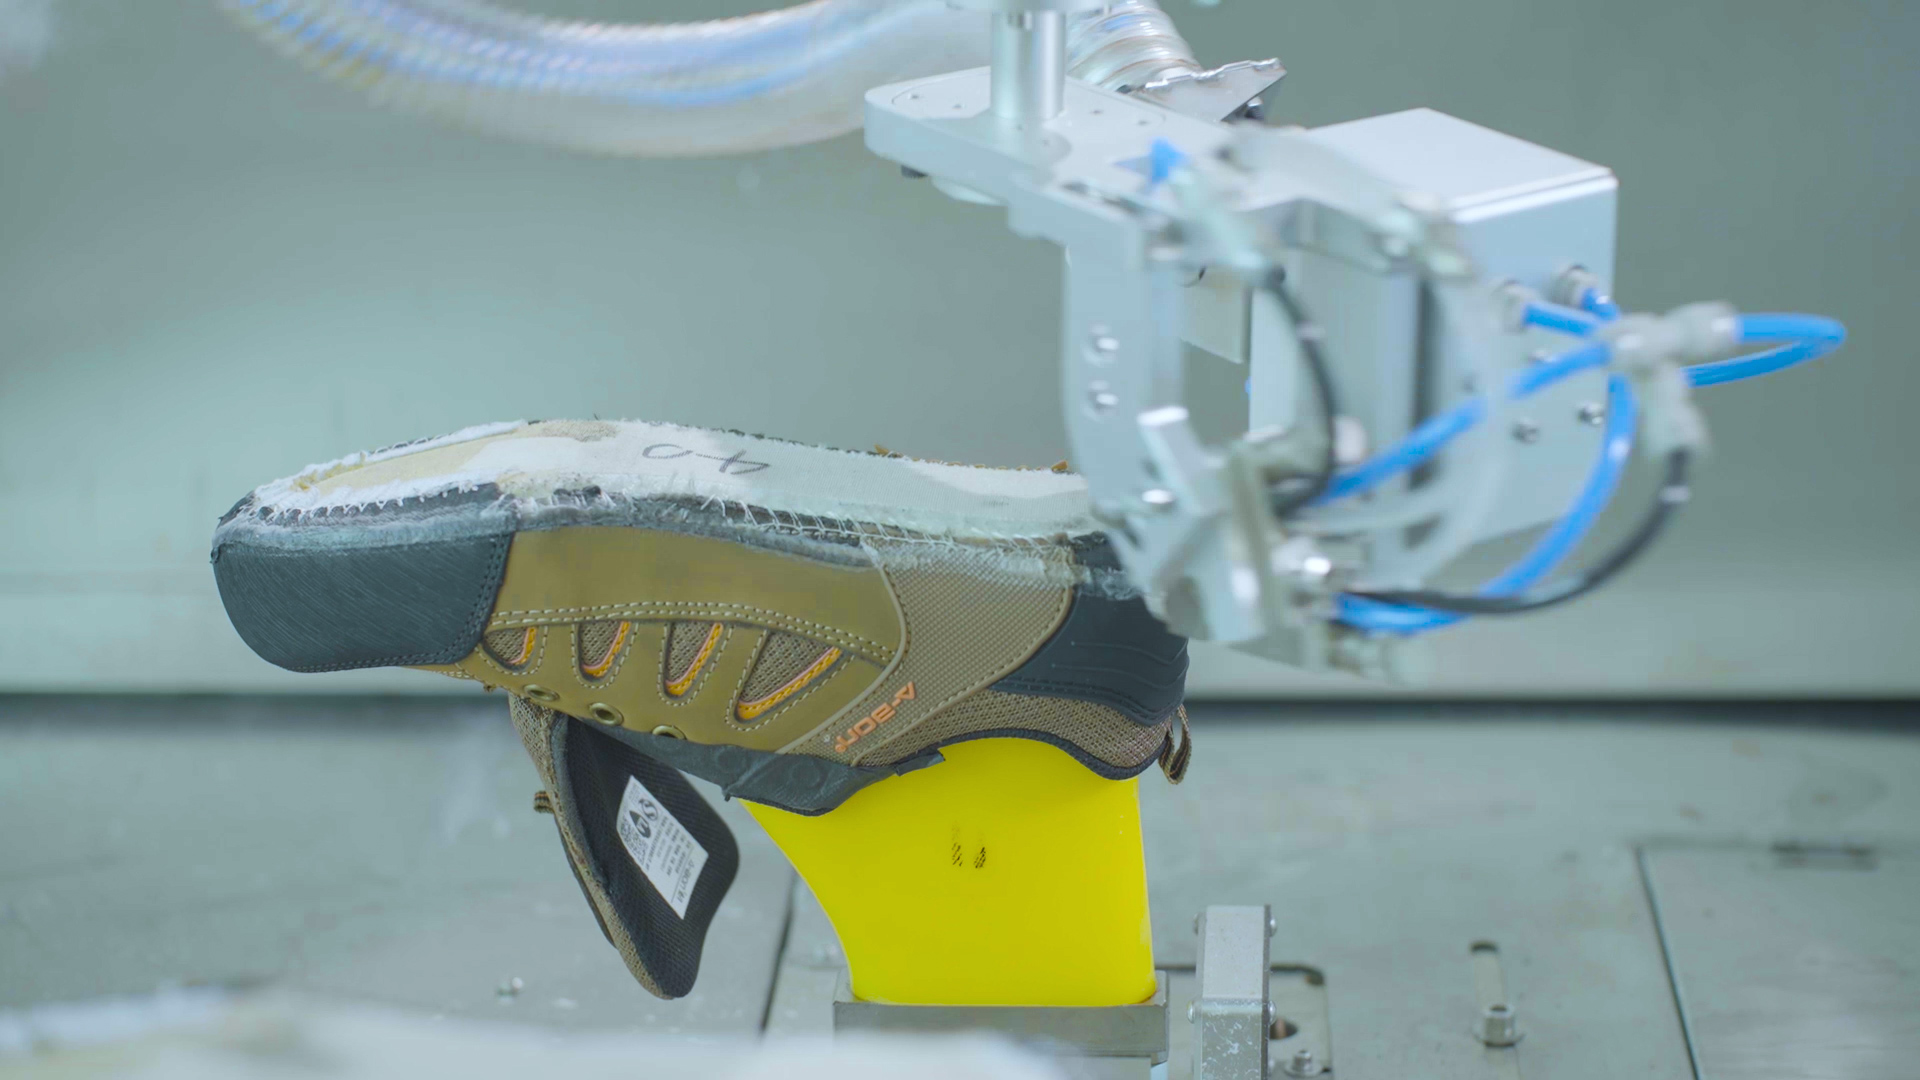 Shoe manufacturing intelligent molding solutions of Huashu robot, breaking the traditional shoe industry dilemma